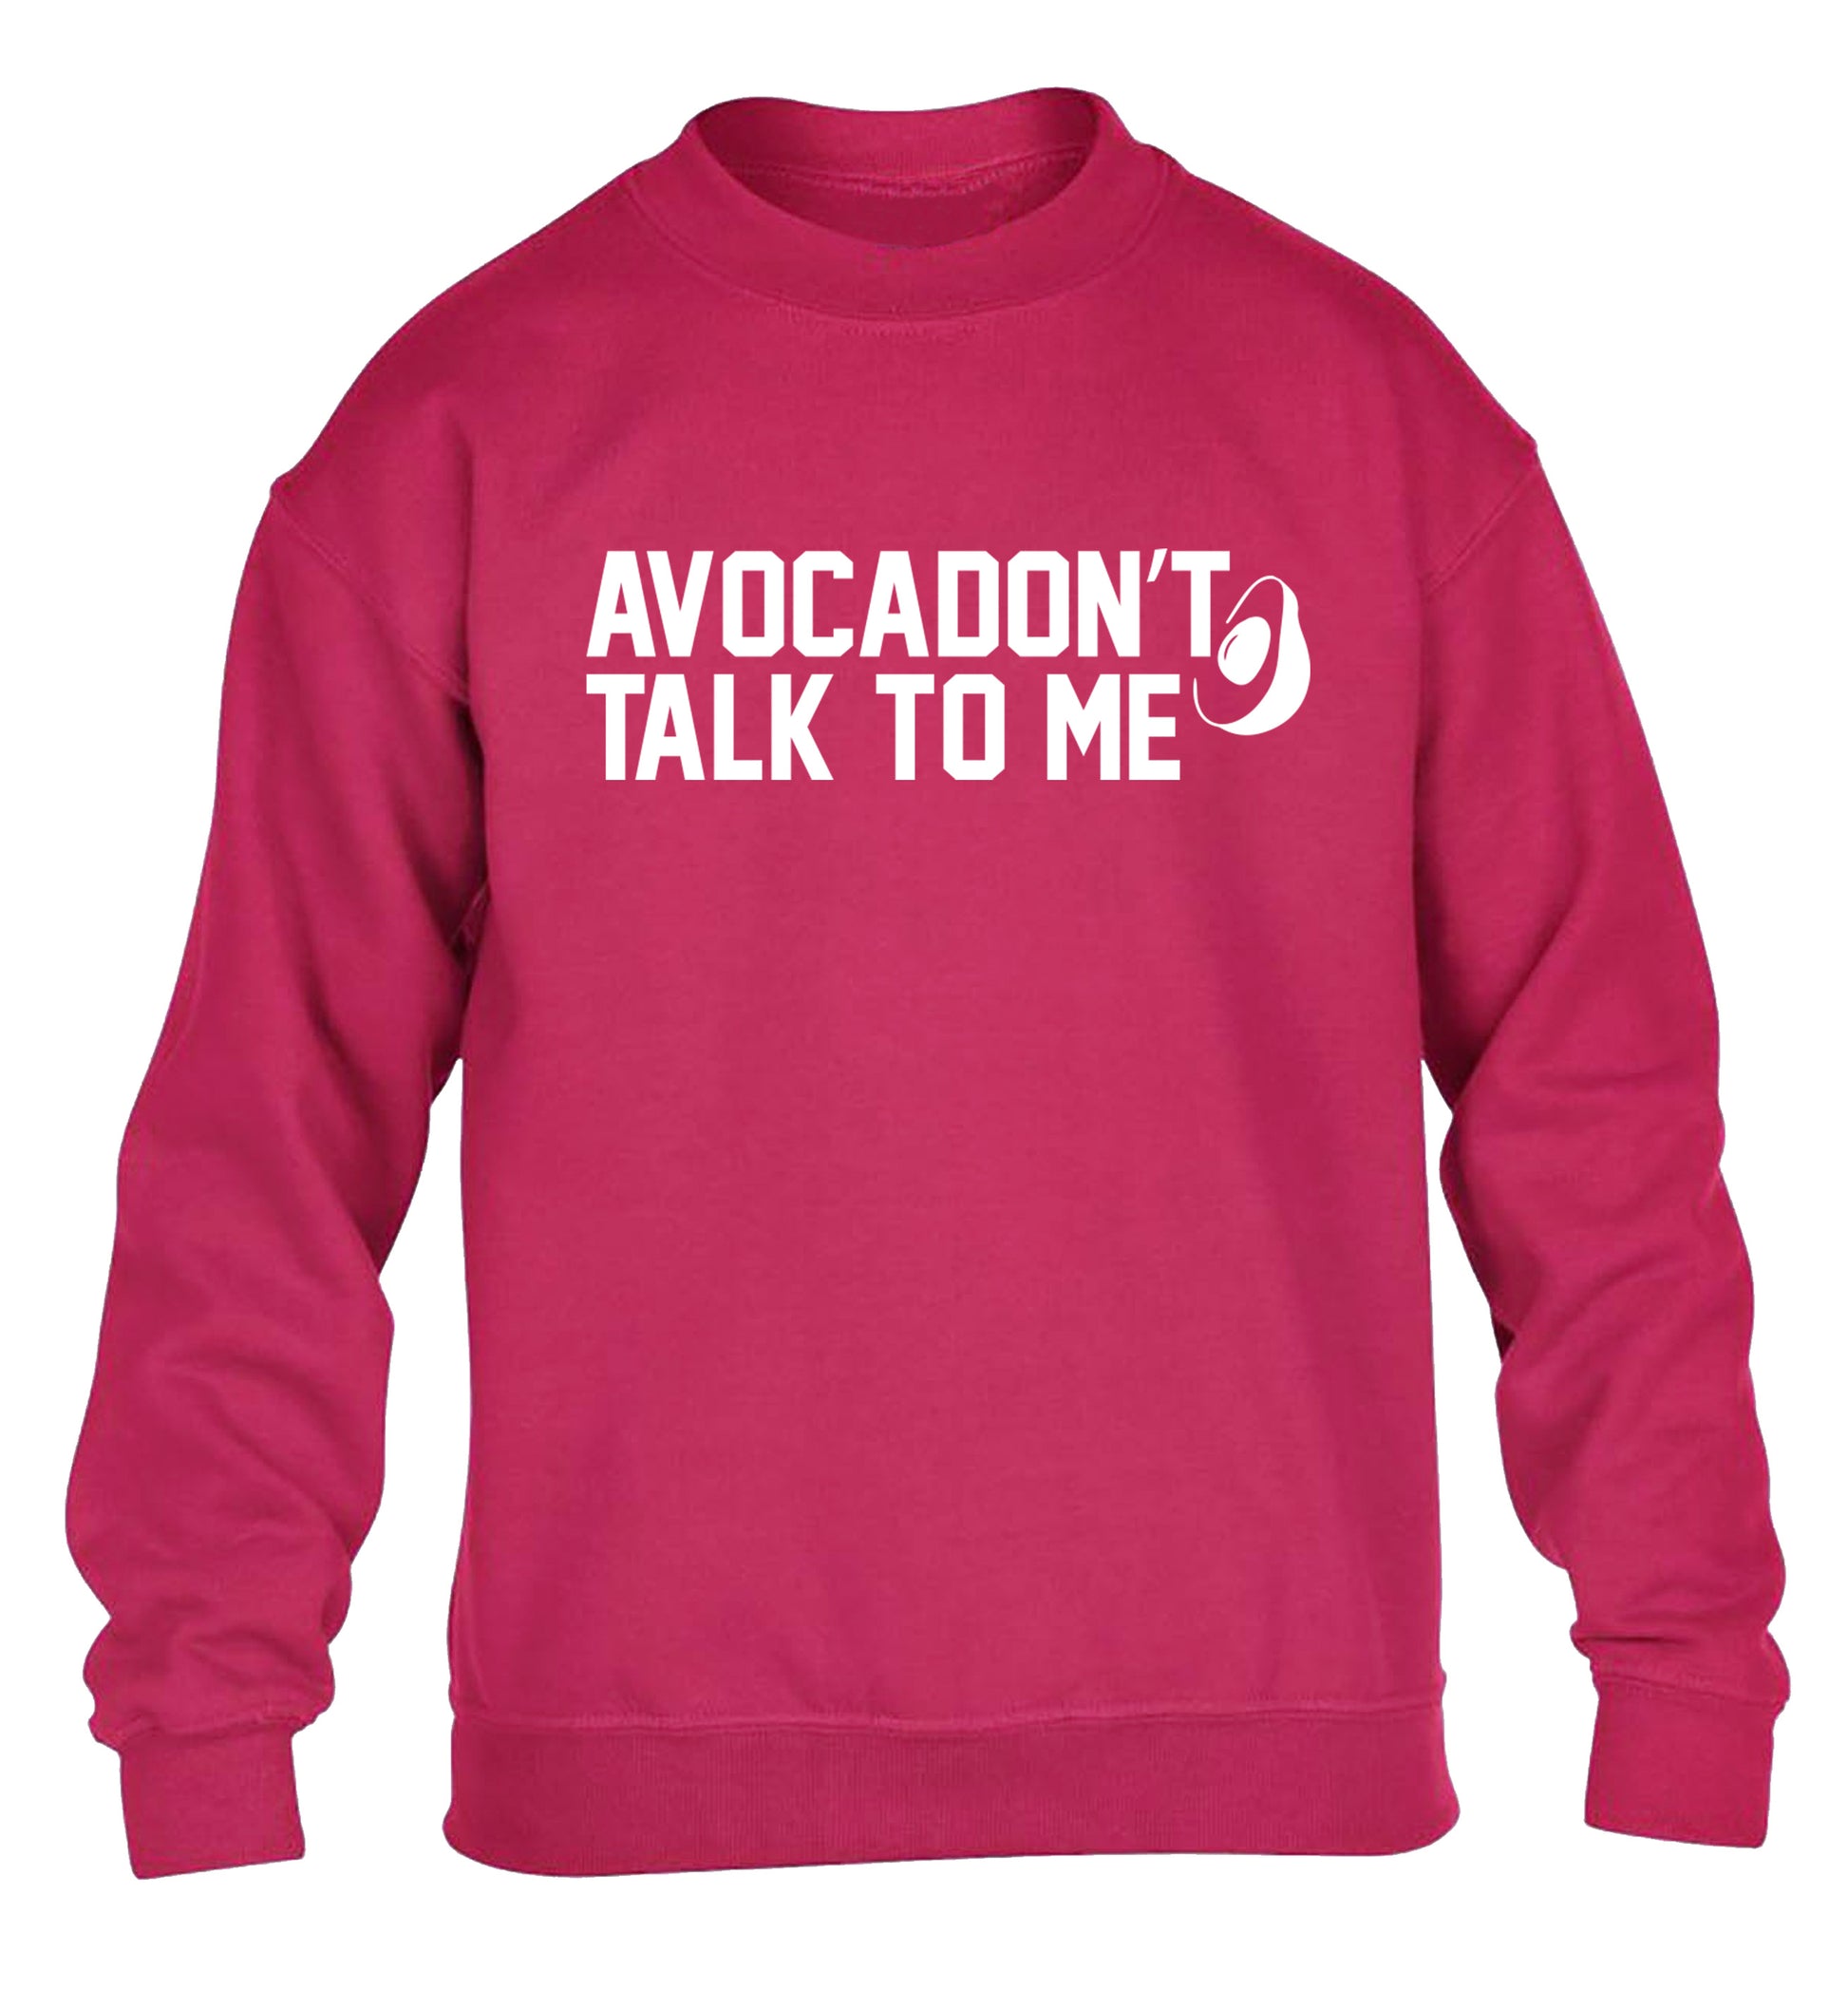 Avocadon't talk to me children's pink sweater 12-14 Years